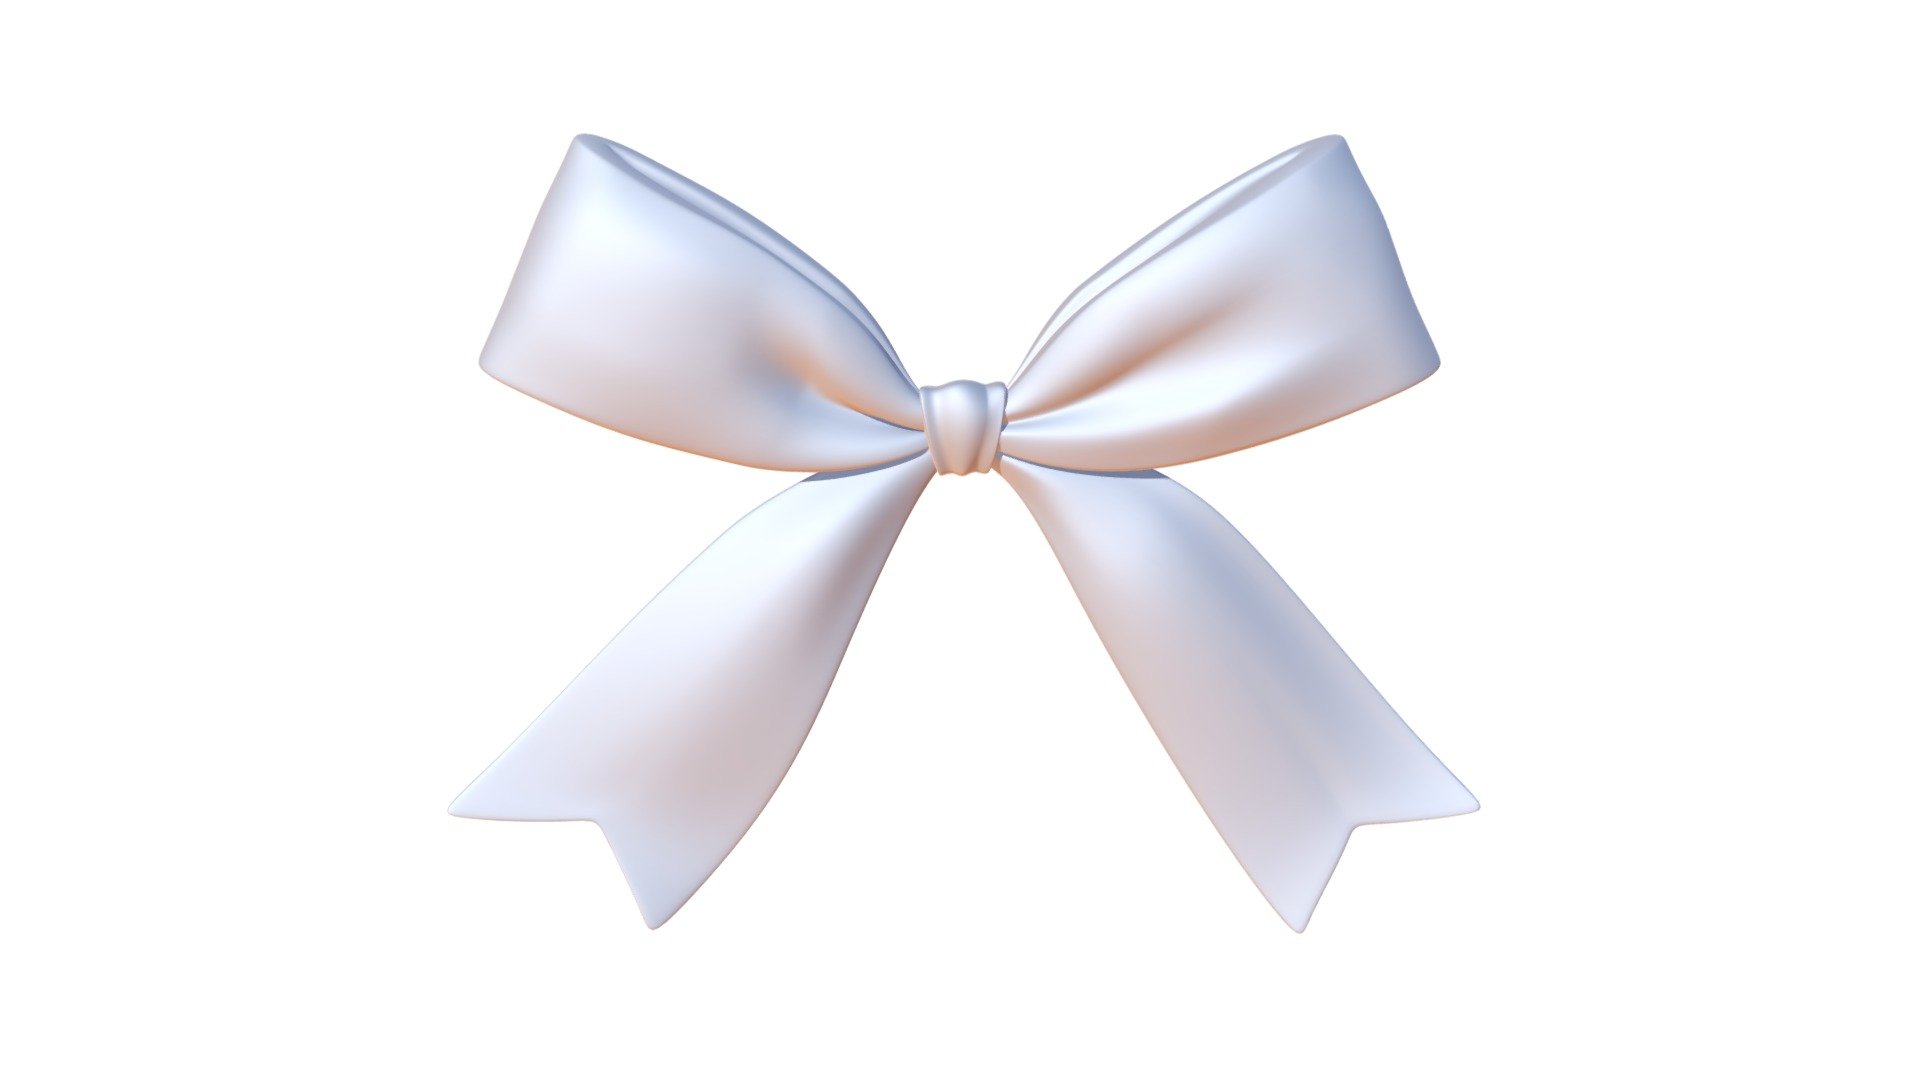 Highpoly hardsurace bow model. Ready for 3D-print or CNC, or render. Size: 80 x 8 x 62 mm. Volume: 9 cm3 3d model